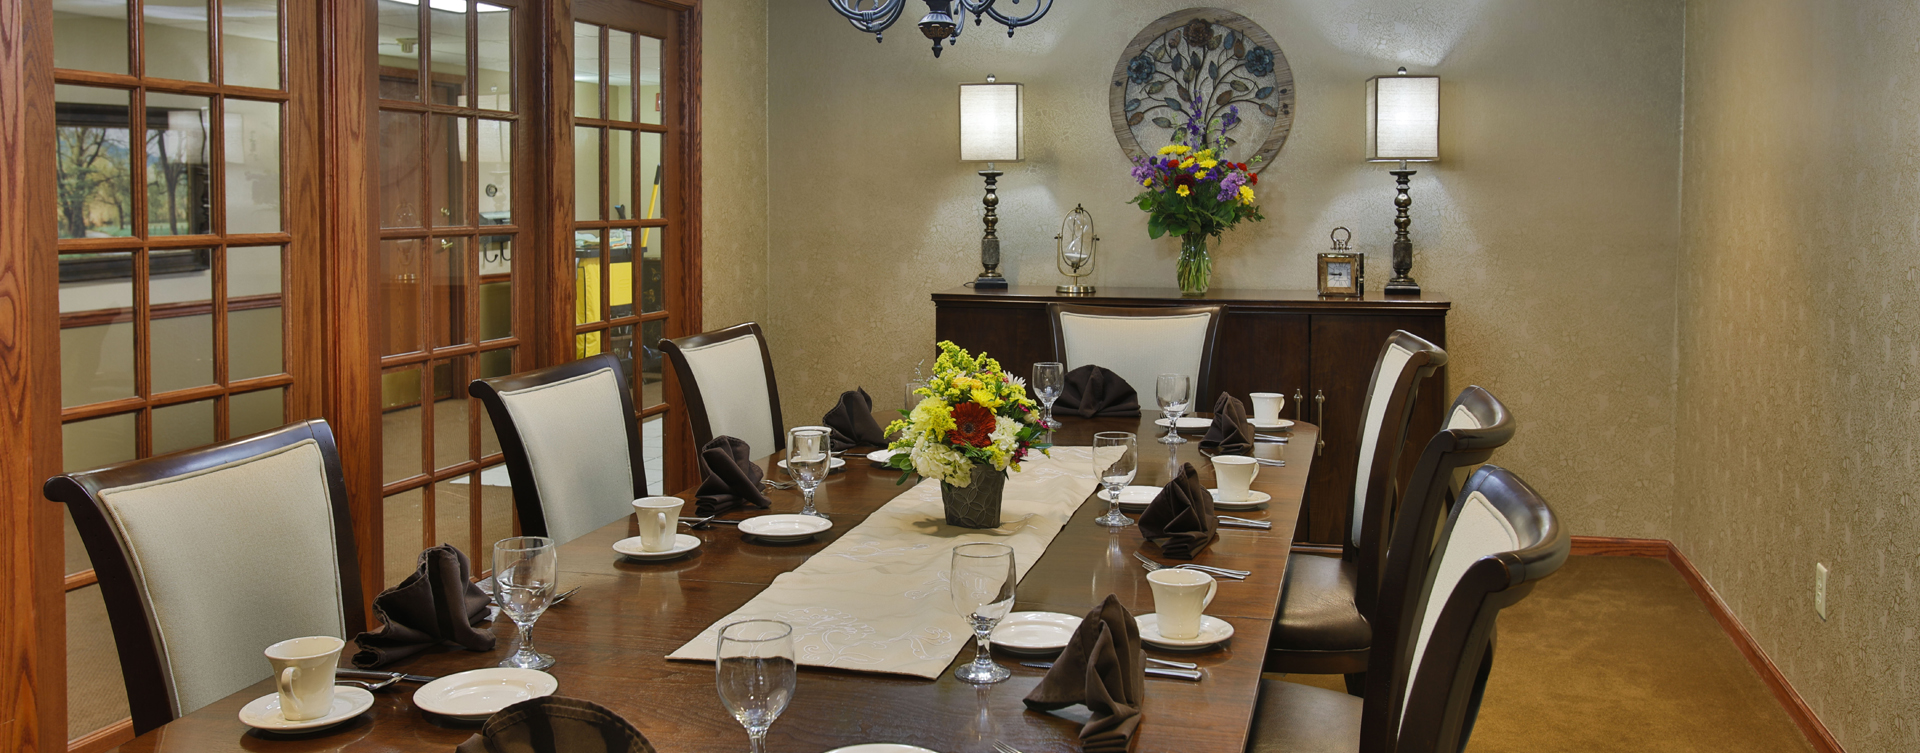 Celebrate special occasions in the private dining room at Bickford of Bloomington